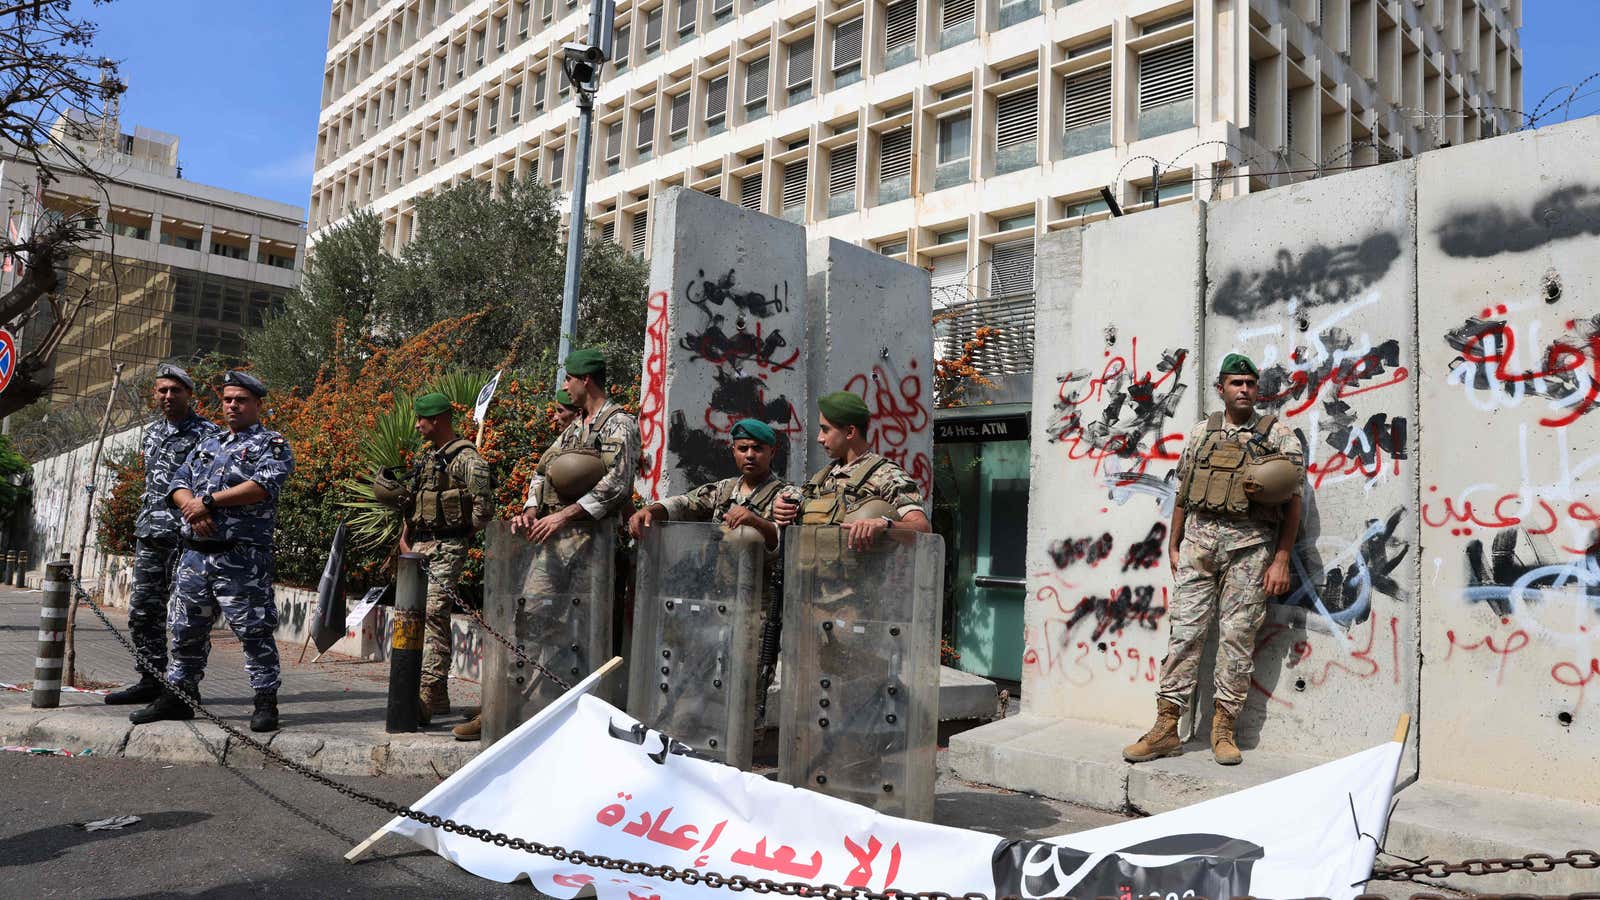 Police stands guard at a protest organised by &quot;Depositors&#39; Outcry&quot; to ask for their deposits blocked in Lebanese banks